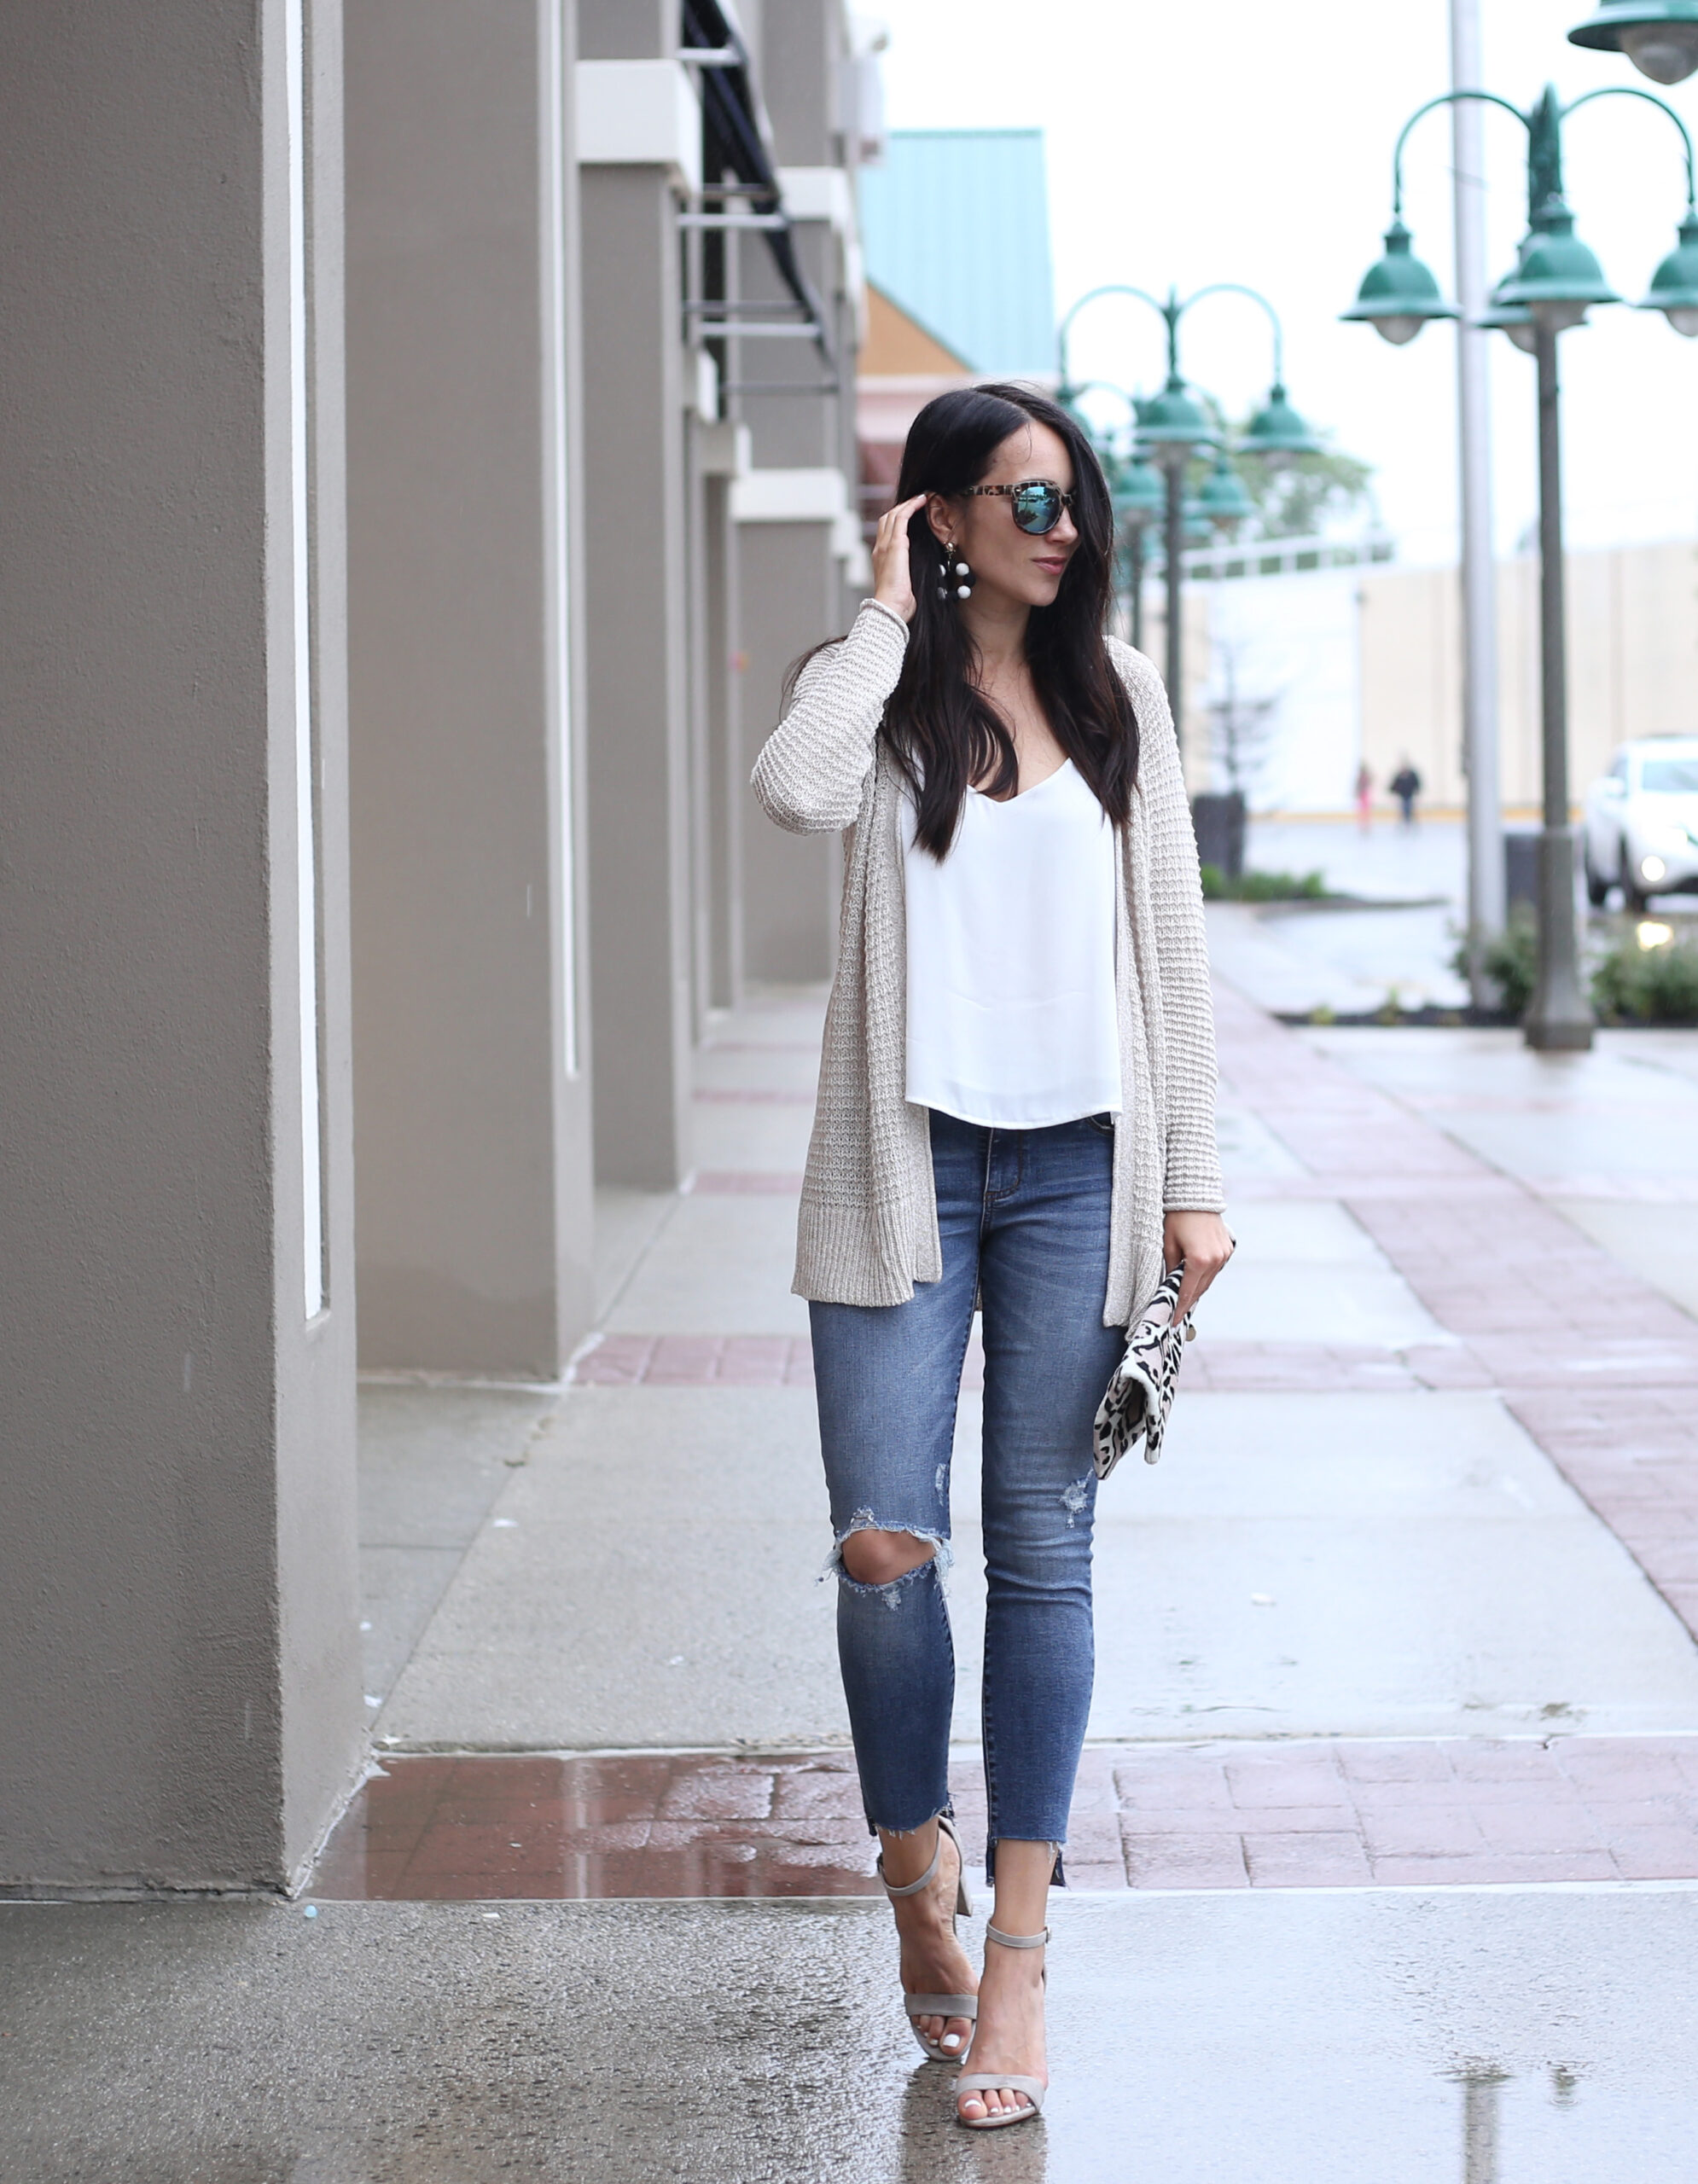 Anna Monteiro of blushing rose style blog wearing skinny jeans and block heel steve madden sandals from nordstrom